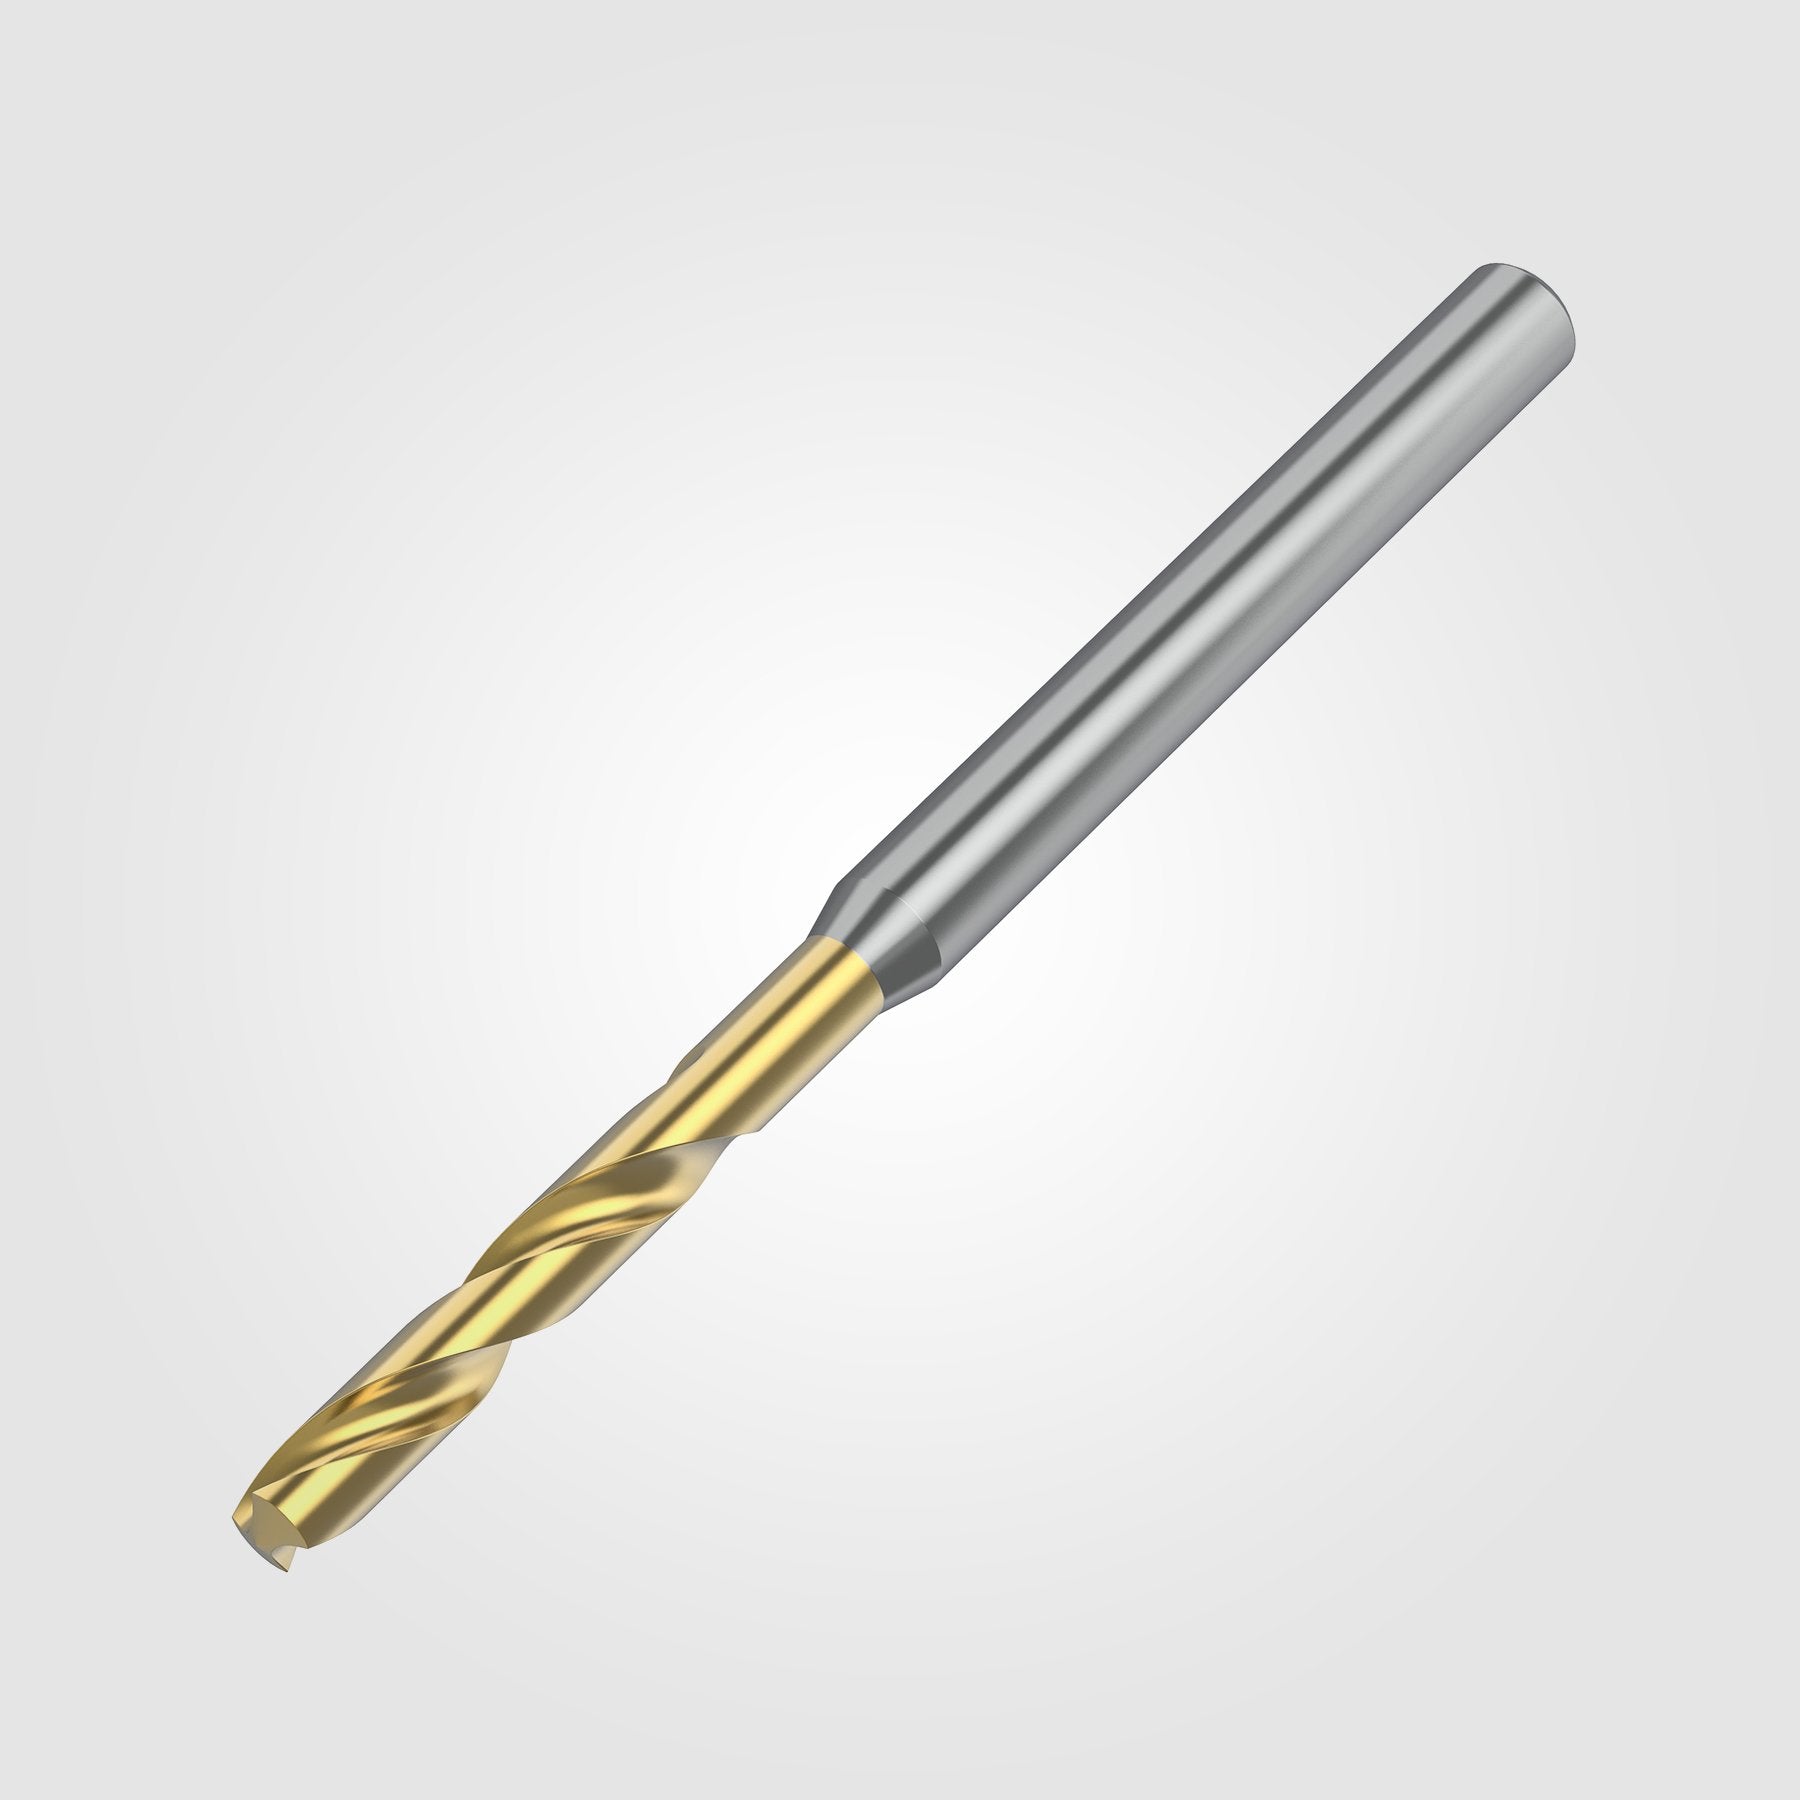 GOdrill (THROUGH COOLANT) | 14.1mm / .5551" / 3xD | SOLID CARBIDE DRILL | 4151252